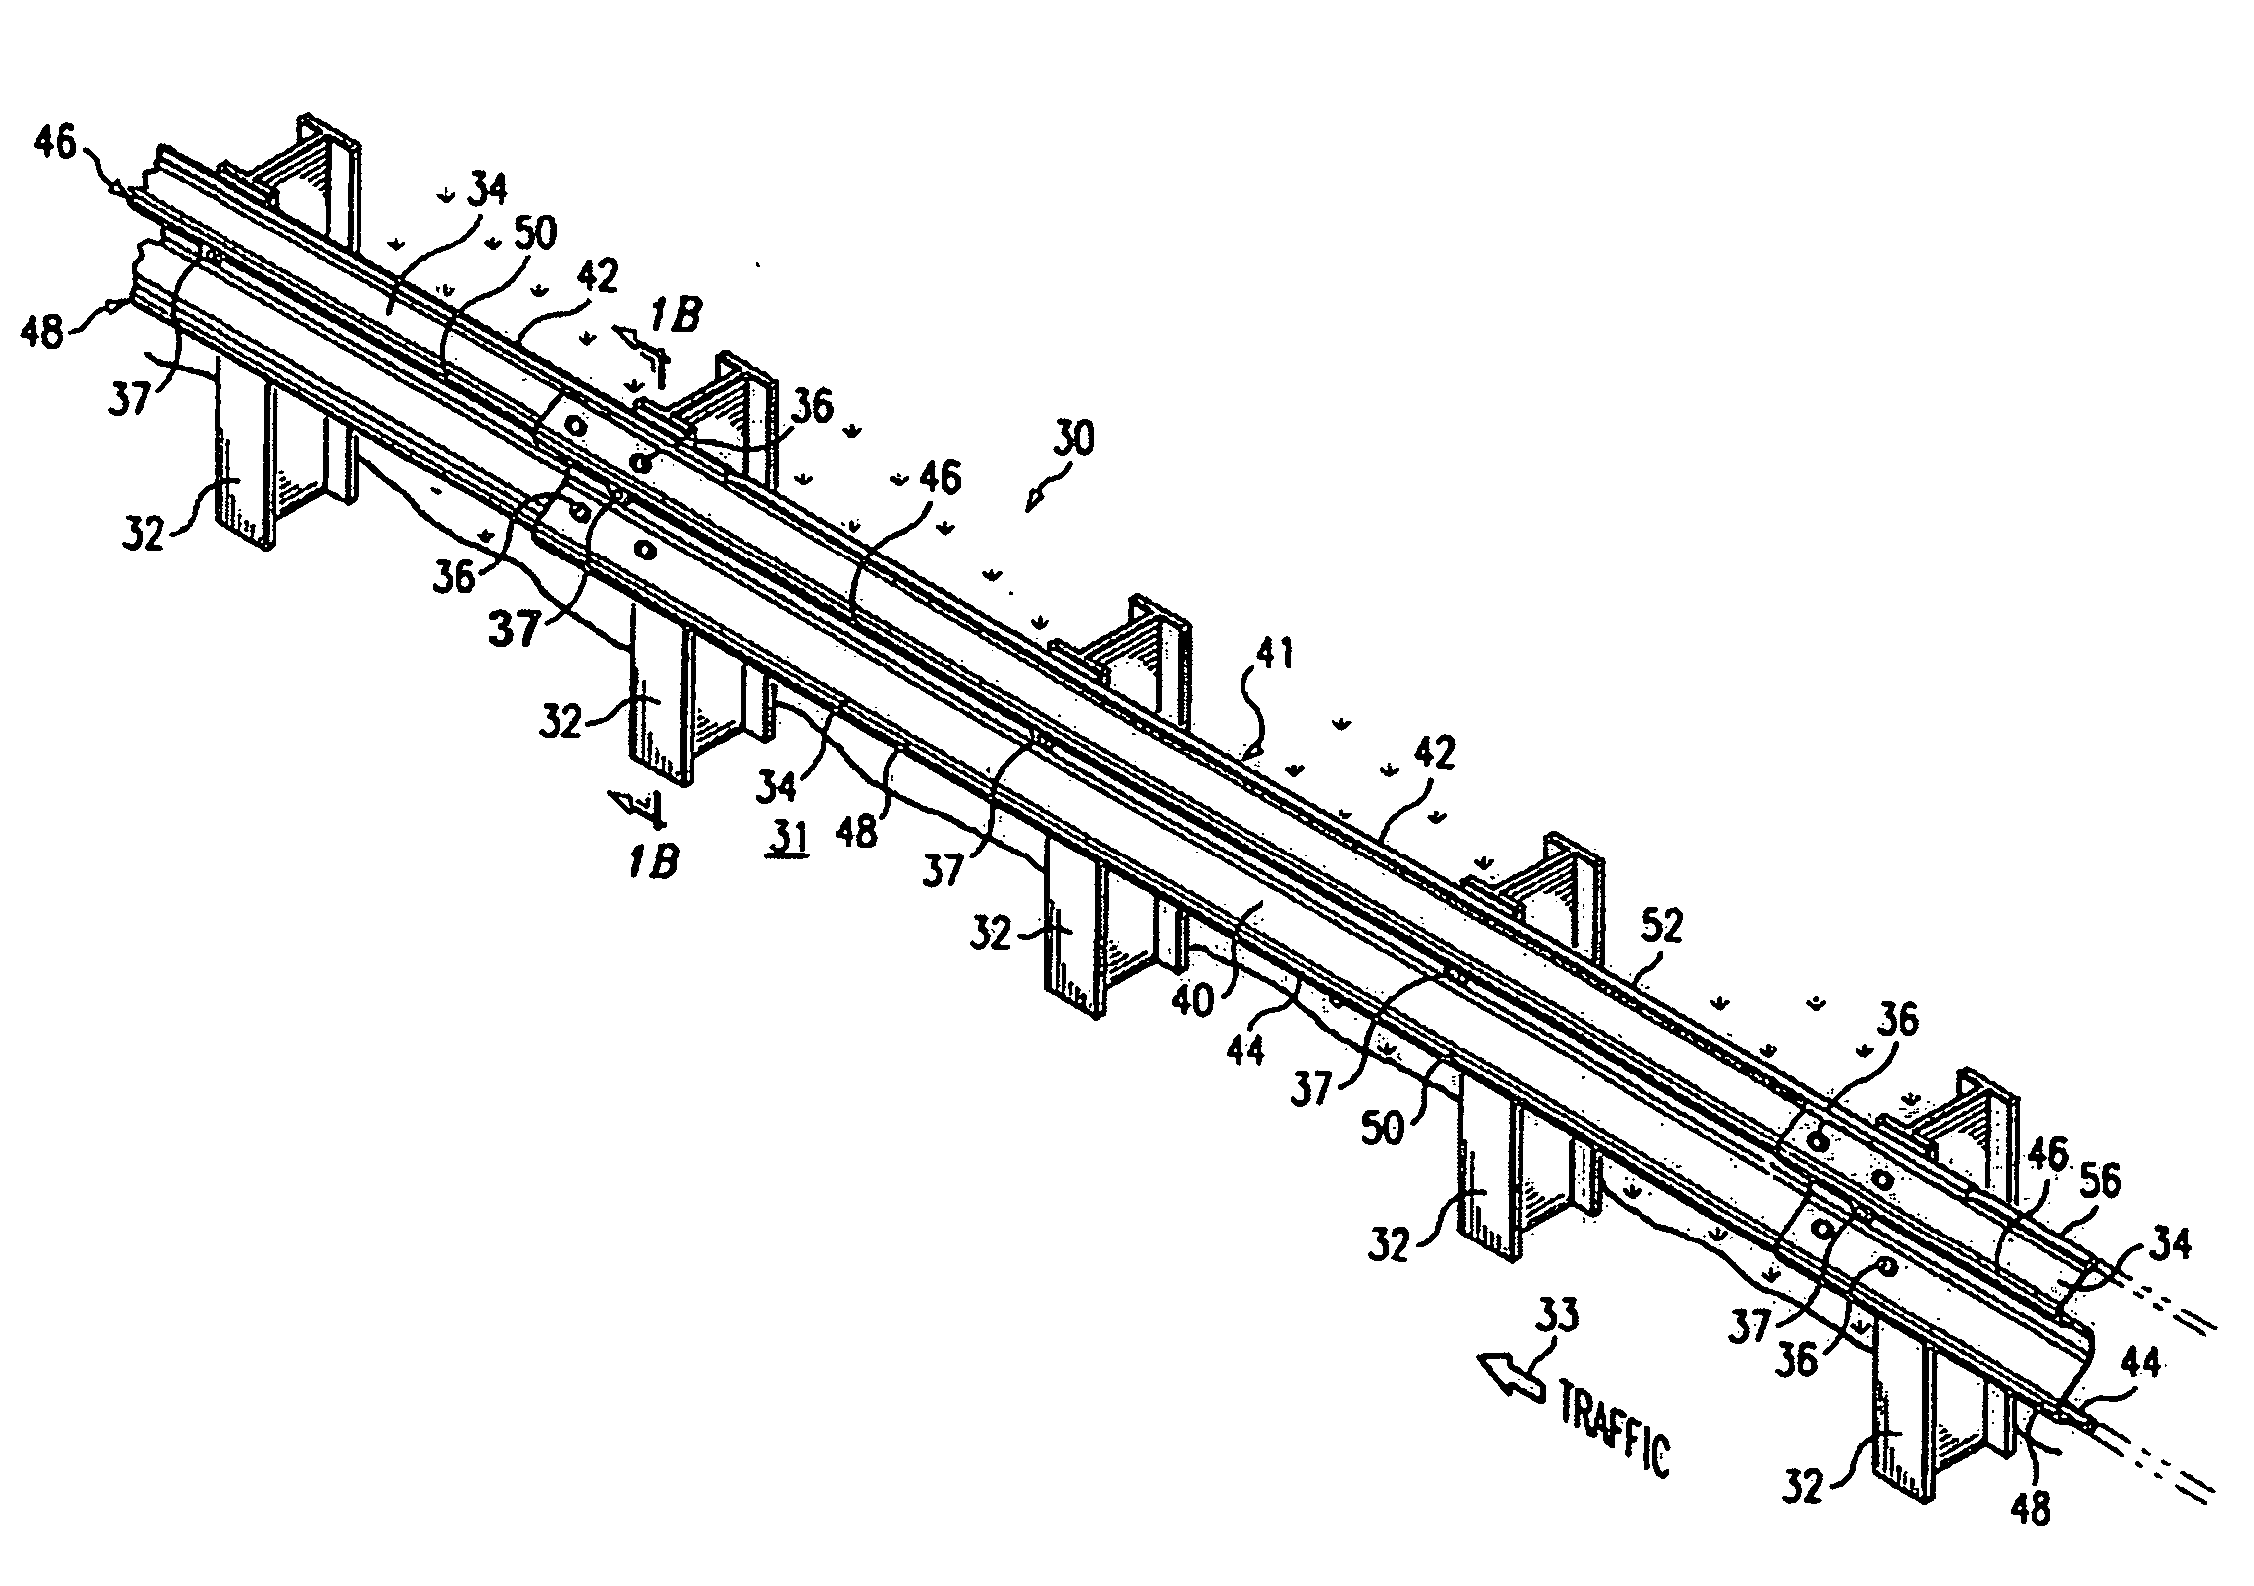 Posts and release mechanism for highway safety structures